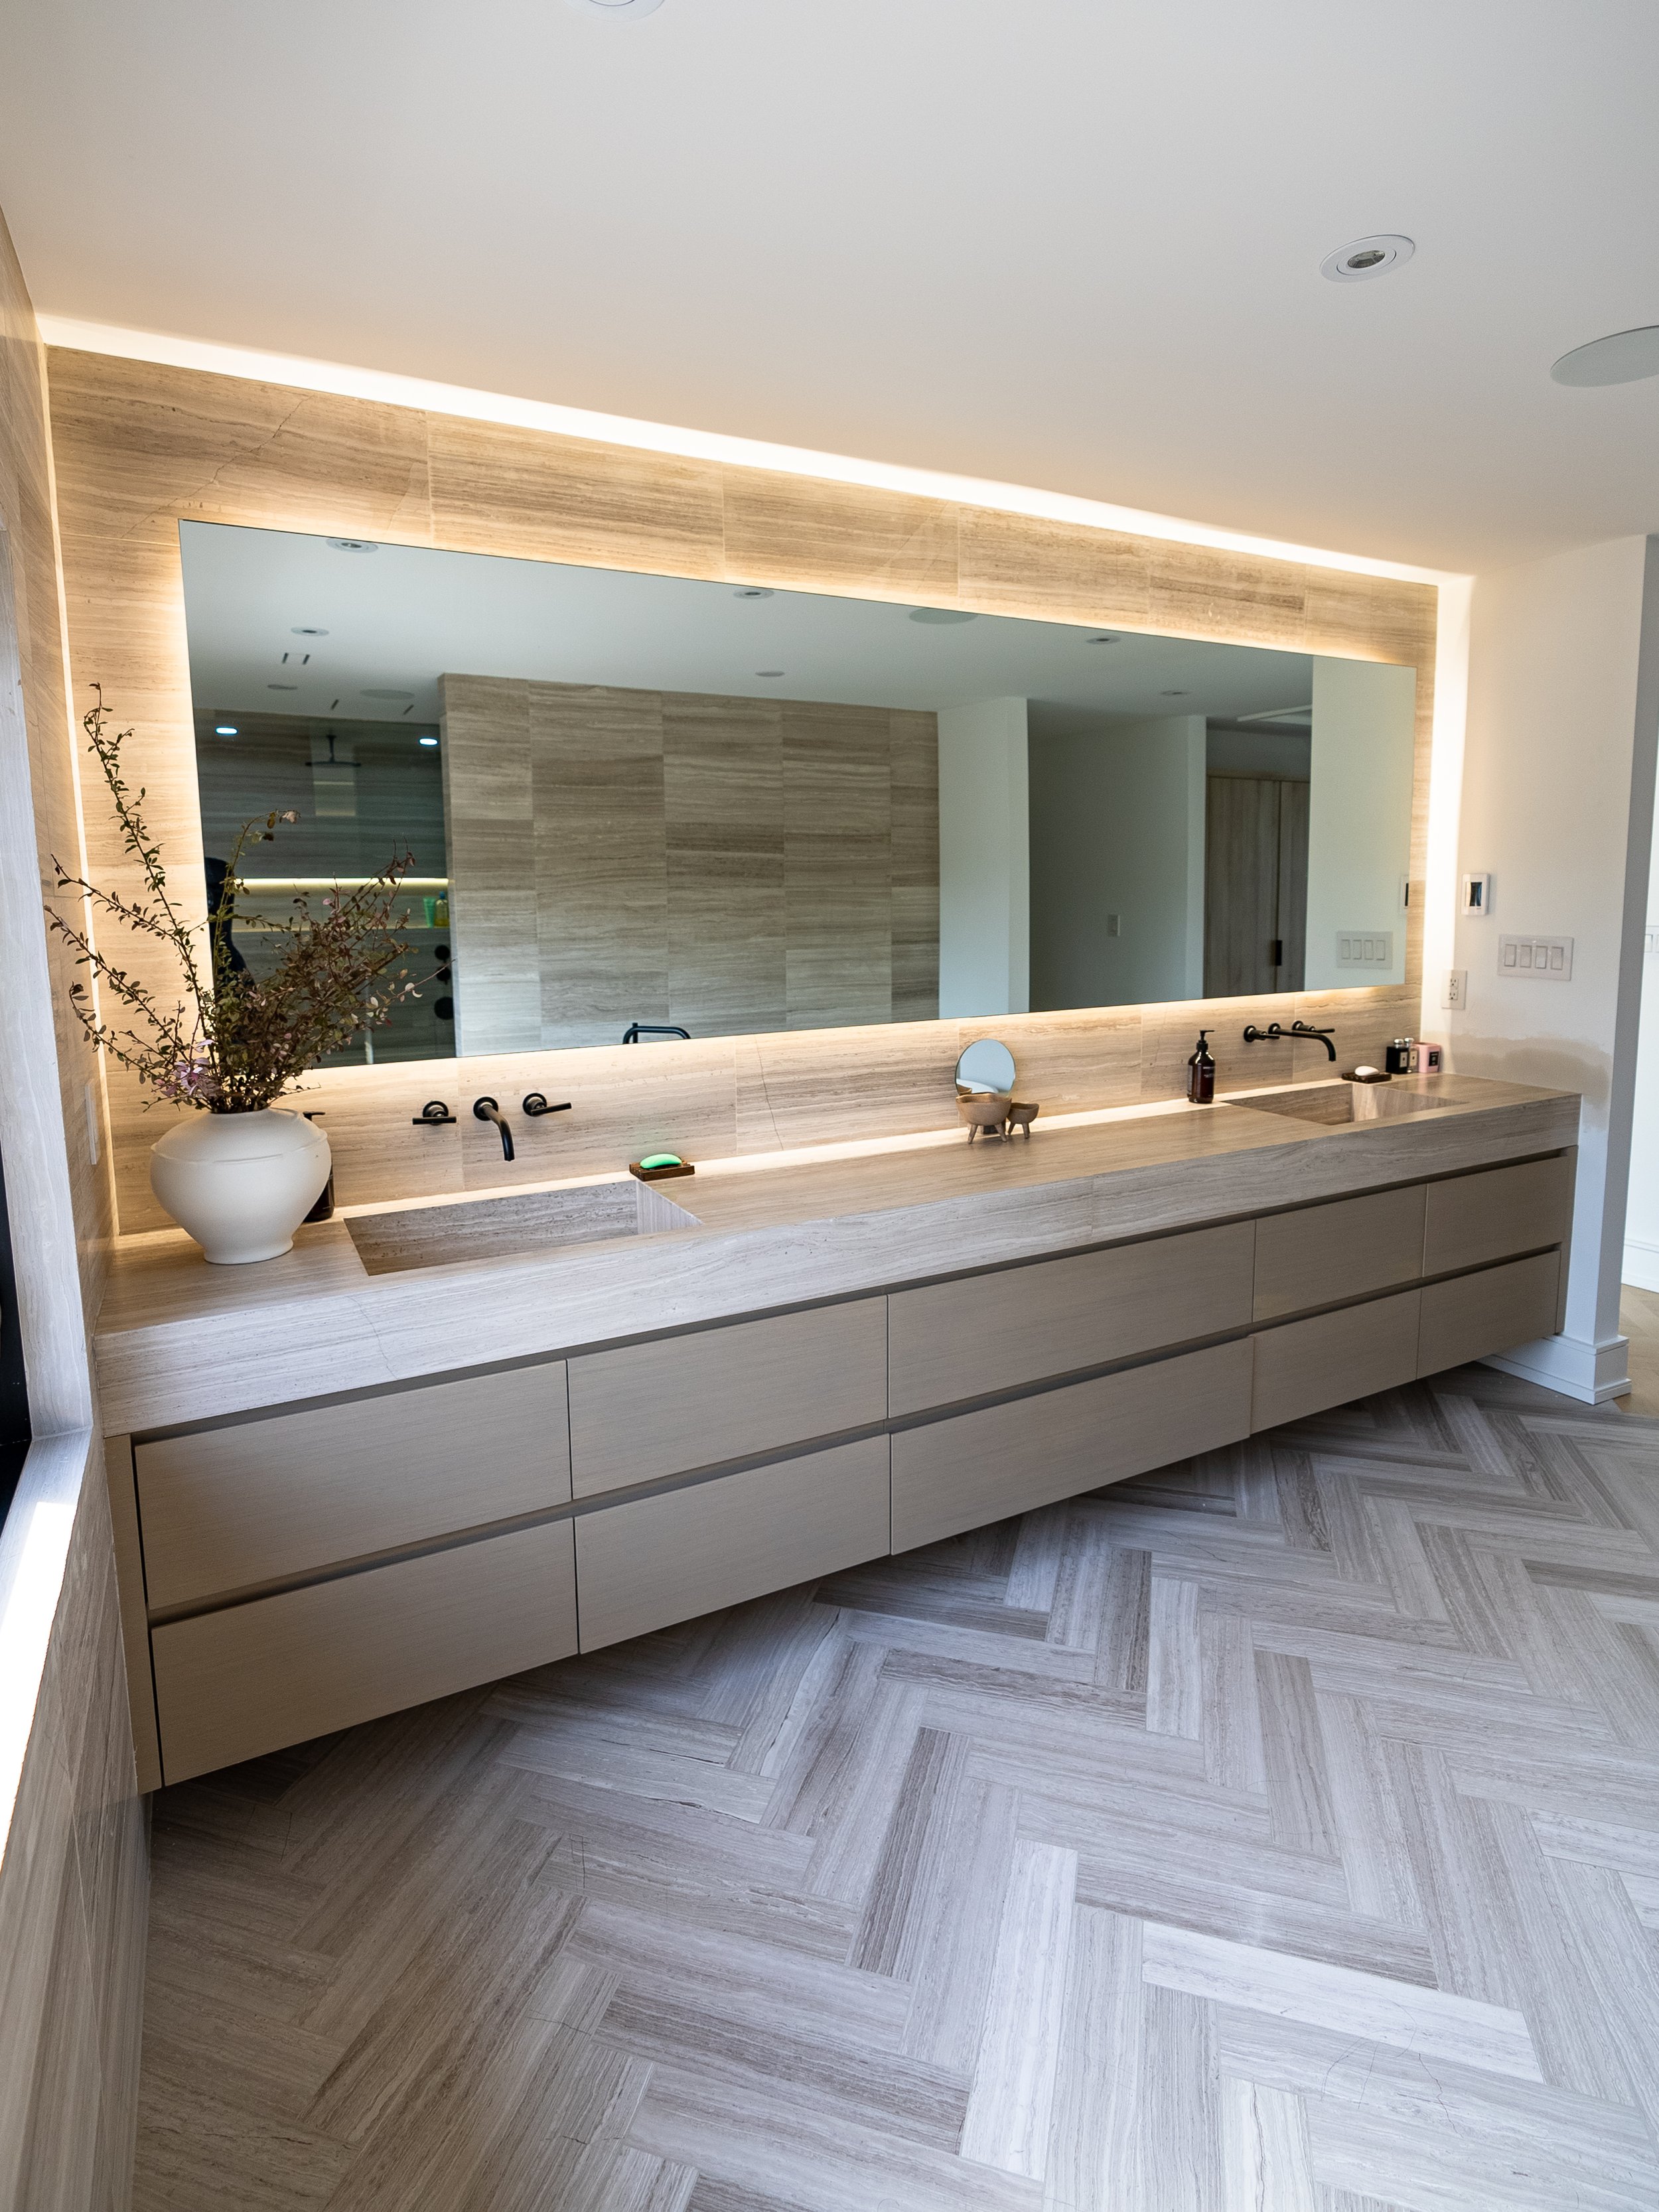  Stunning travertine master en-suite fully protected in honed PROSHIELD. Vanity, shower bench &amp; niche. 